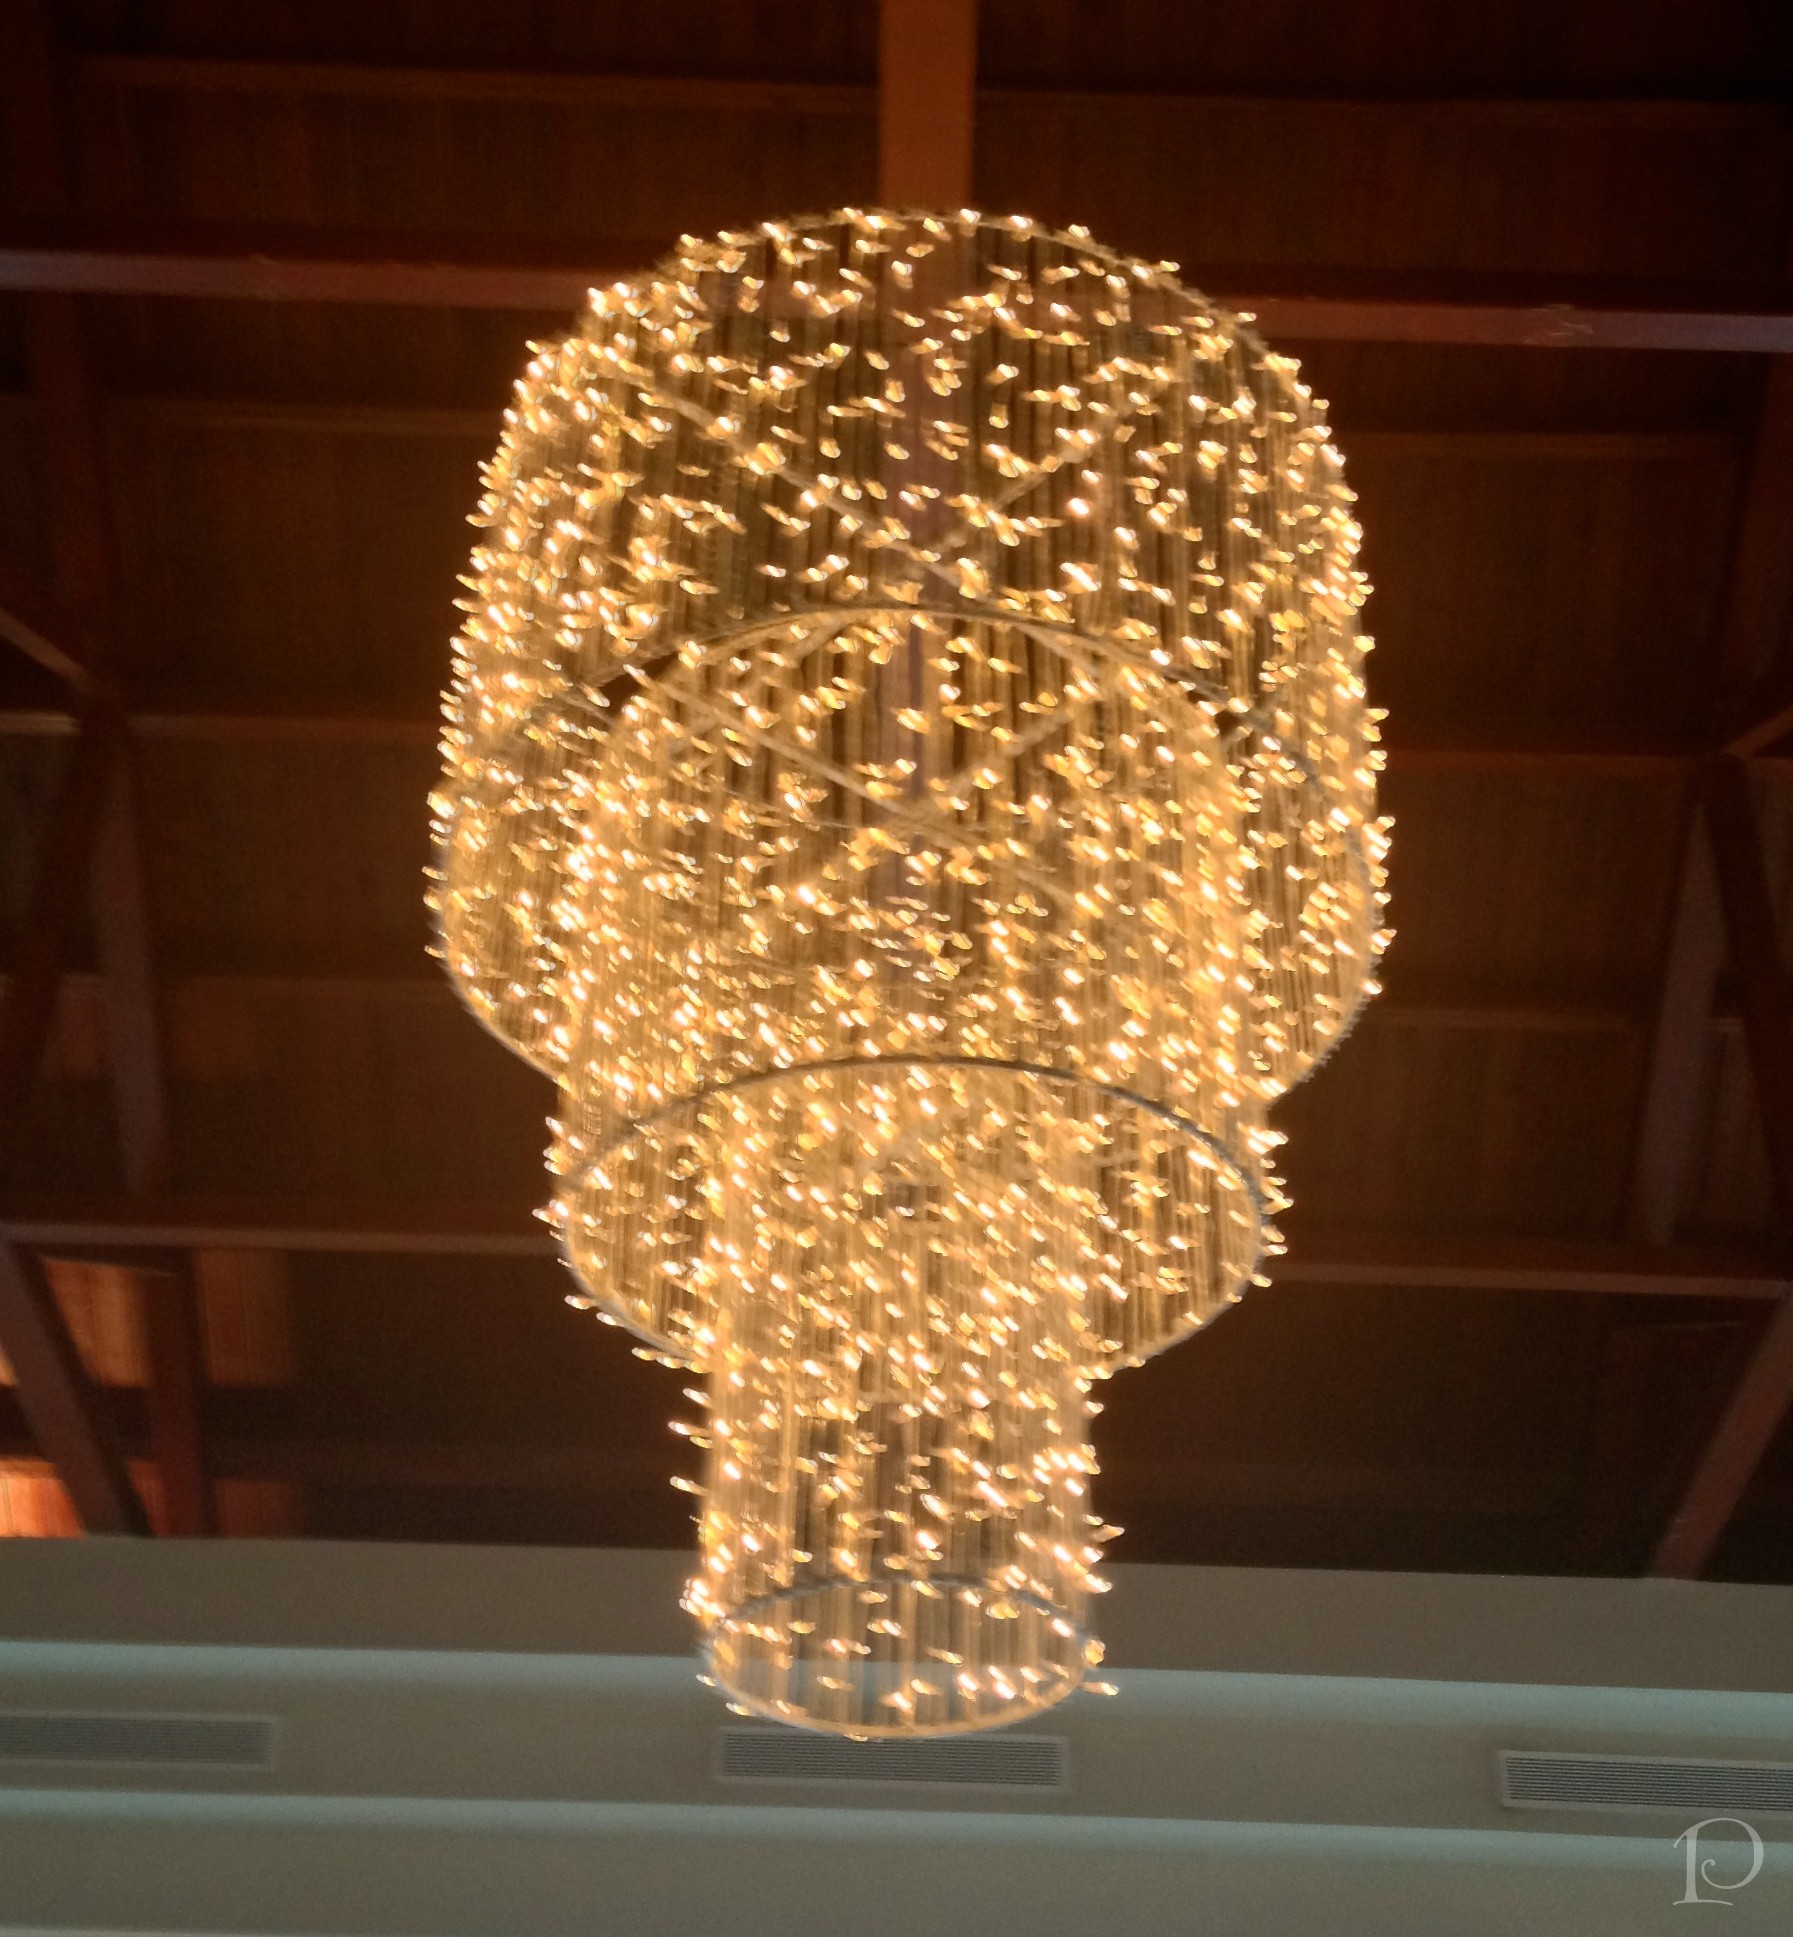 This was a chandelier made out of hanging white lights on white cords 